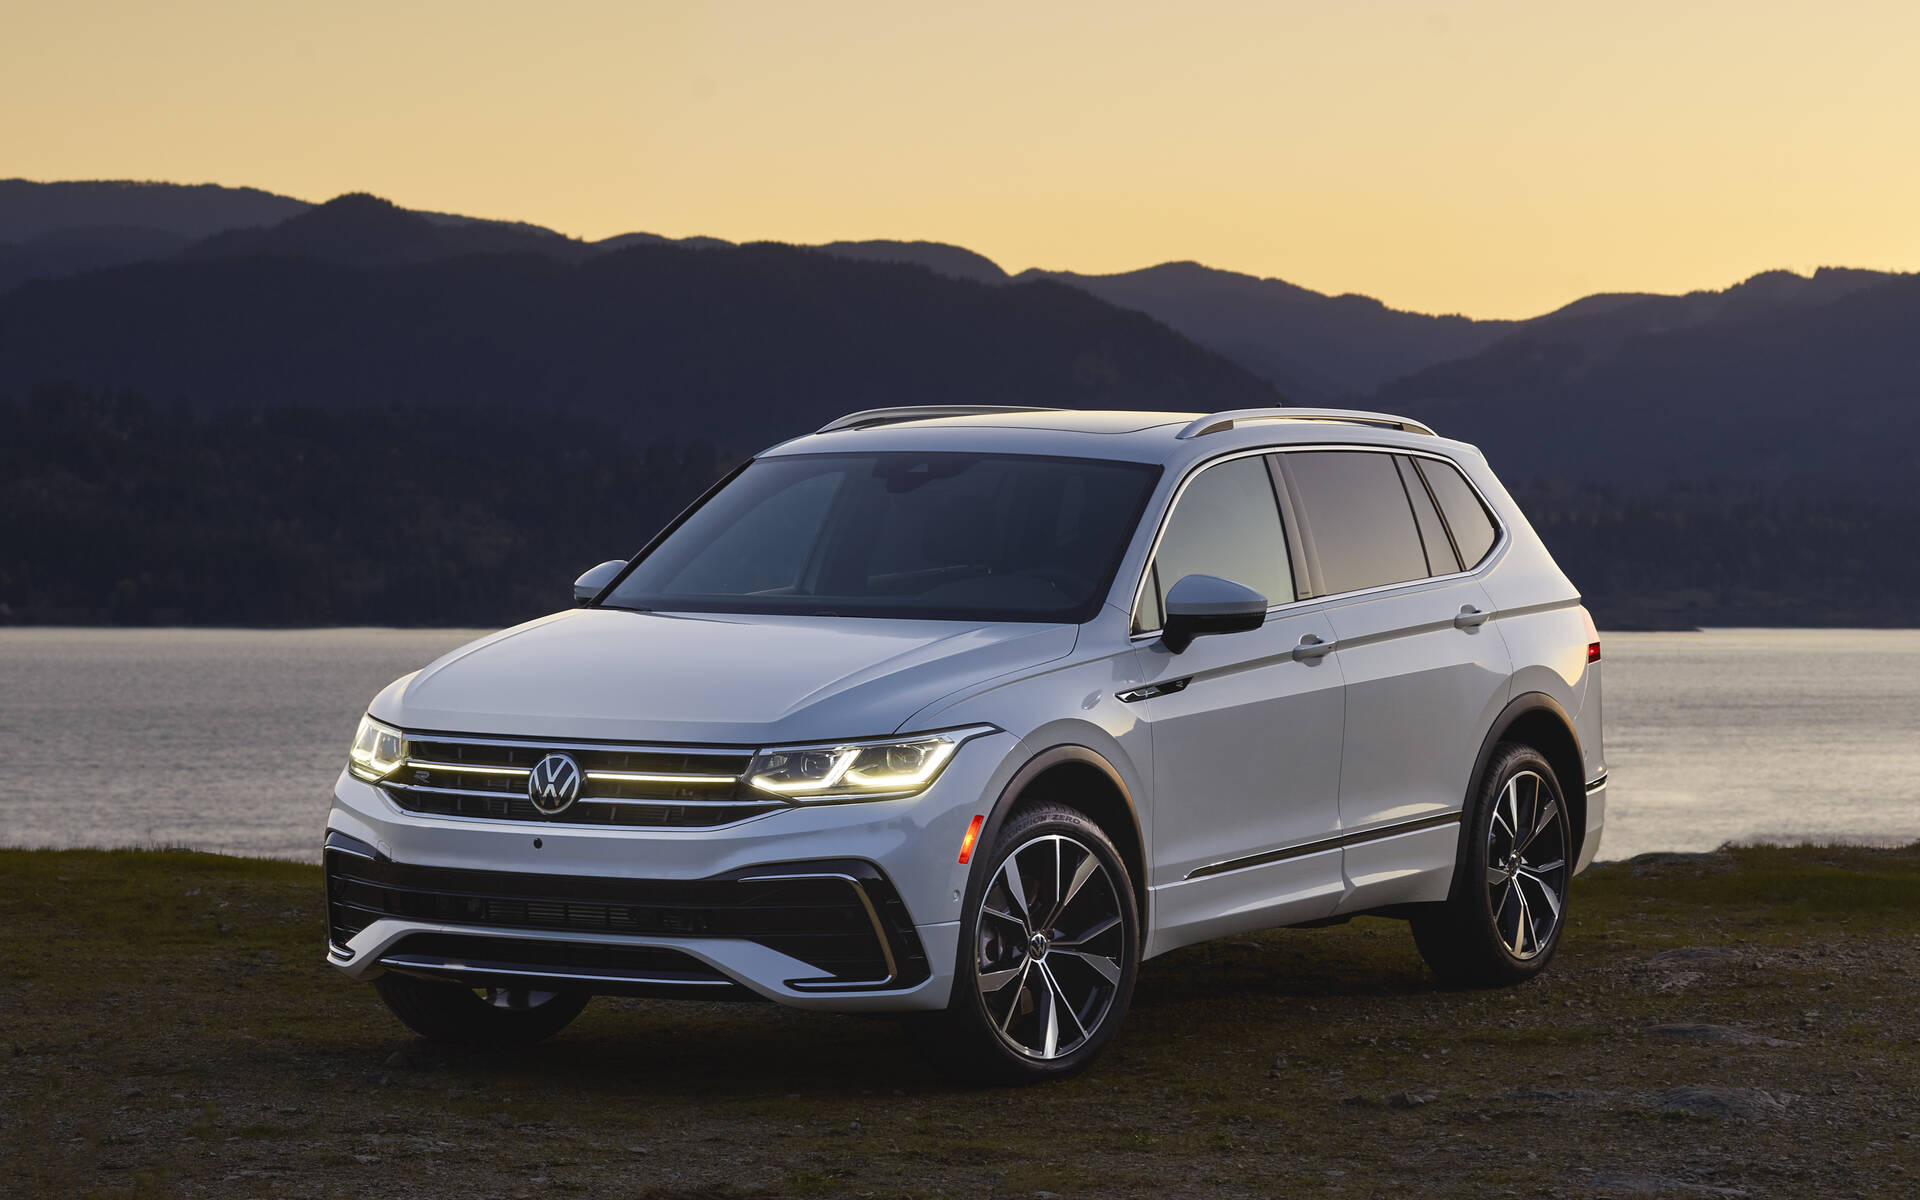 2023 Volkswagen Tiguan - News, reviews, picture galleries and